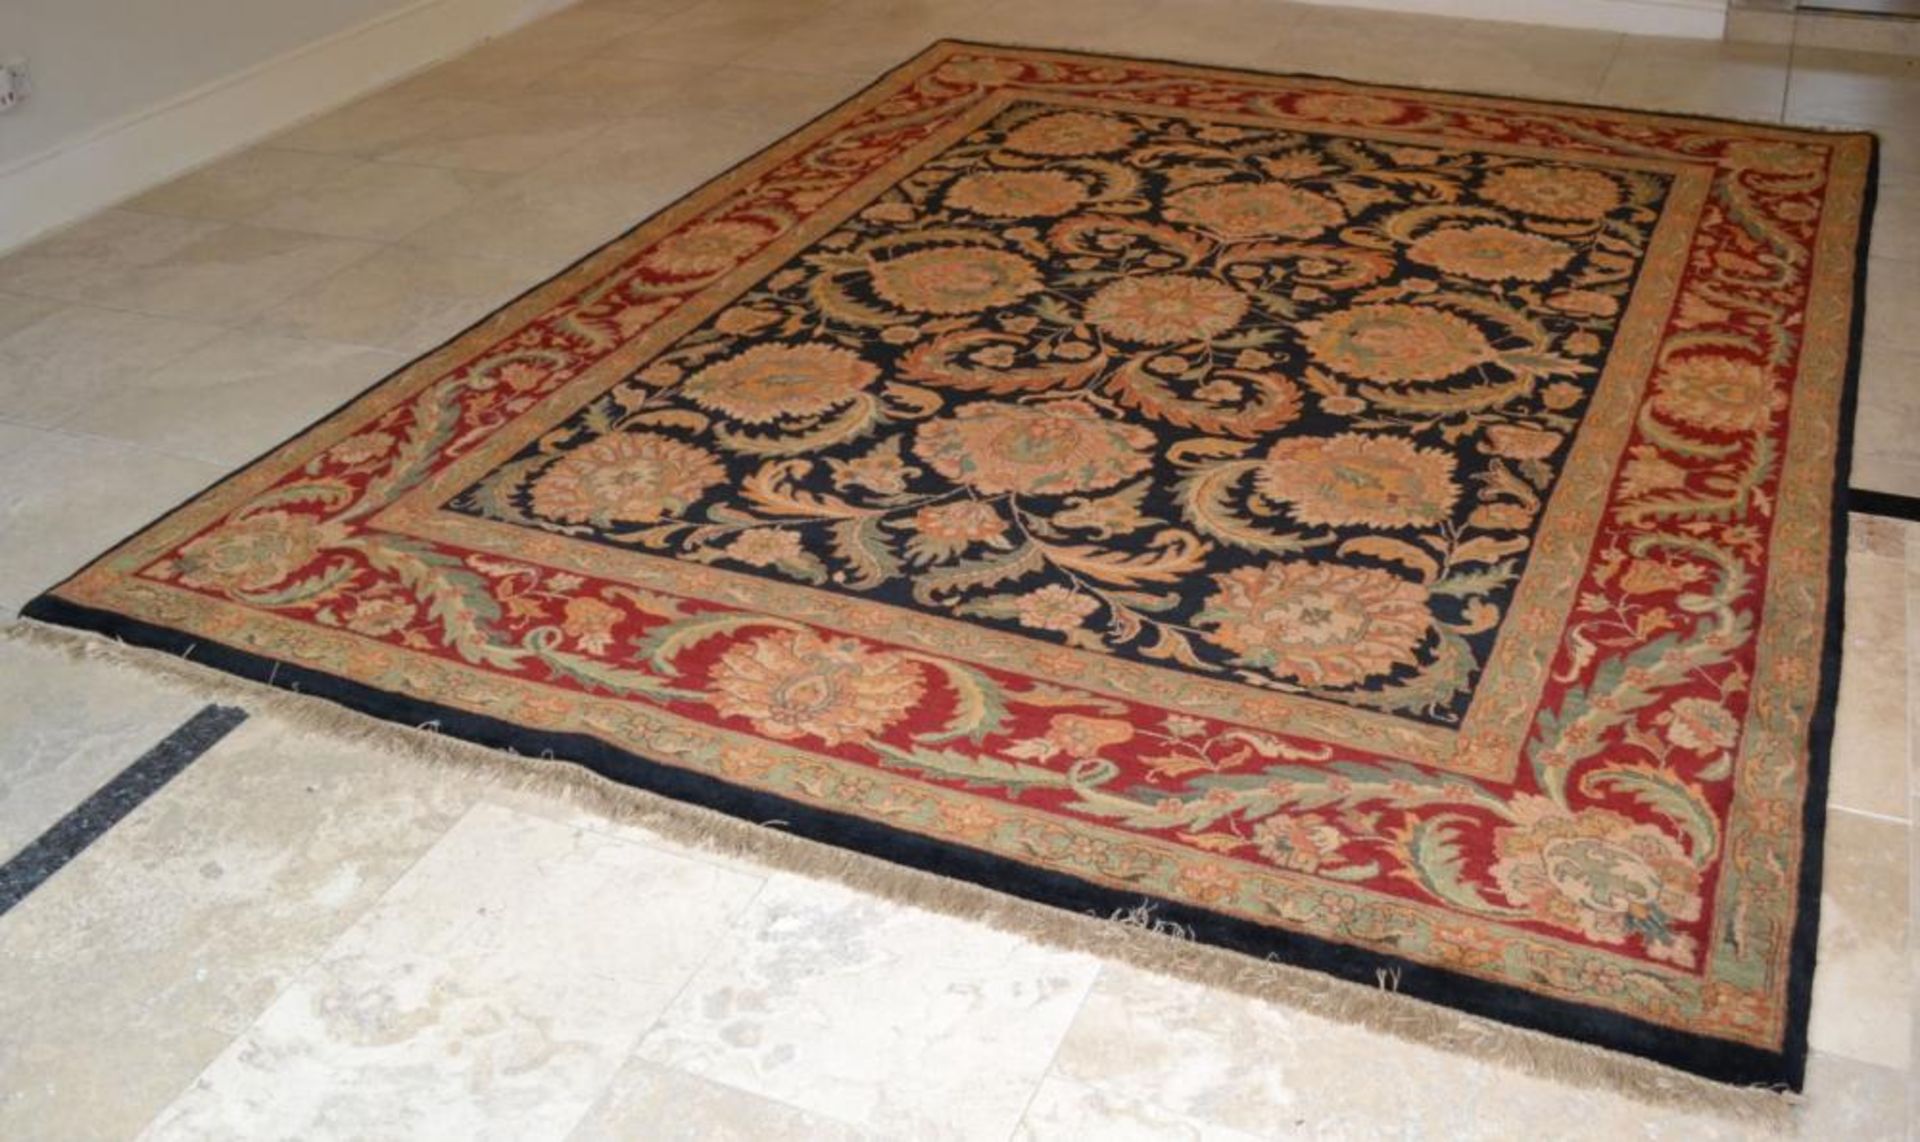 1 x Red and Black Jaipur Handknotted Carpet - Handwoven In Jaipur With Handspun Wool And Vegetable D - Image 15 of 16